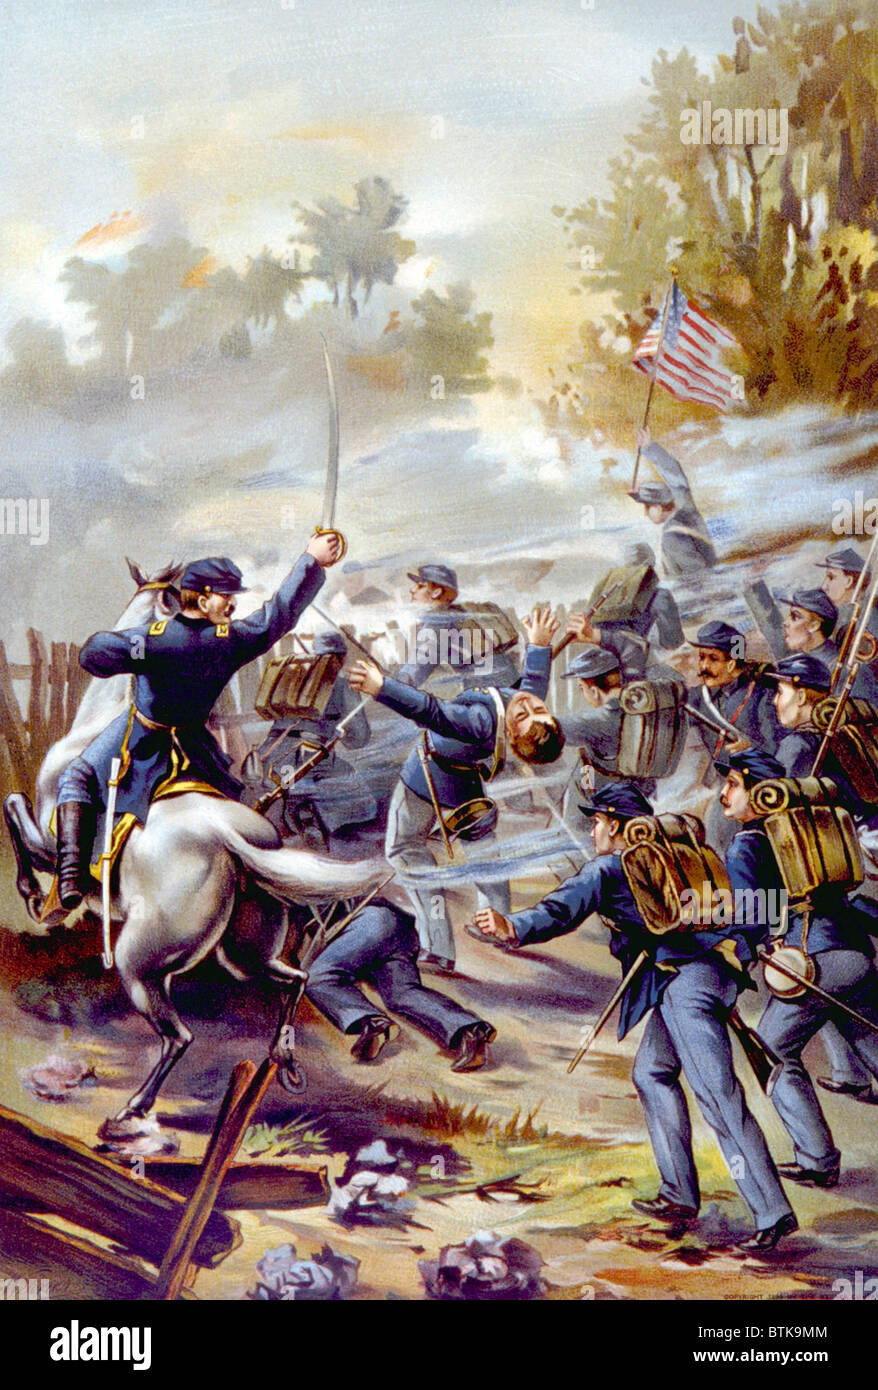 Union Army colonel and infantry volunteer troops in battle, 1864 Stock Photo